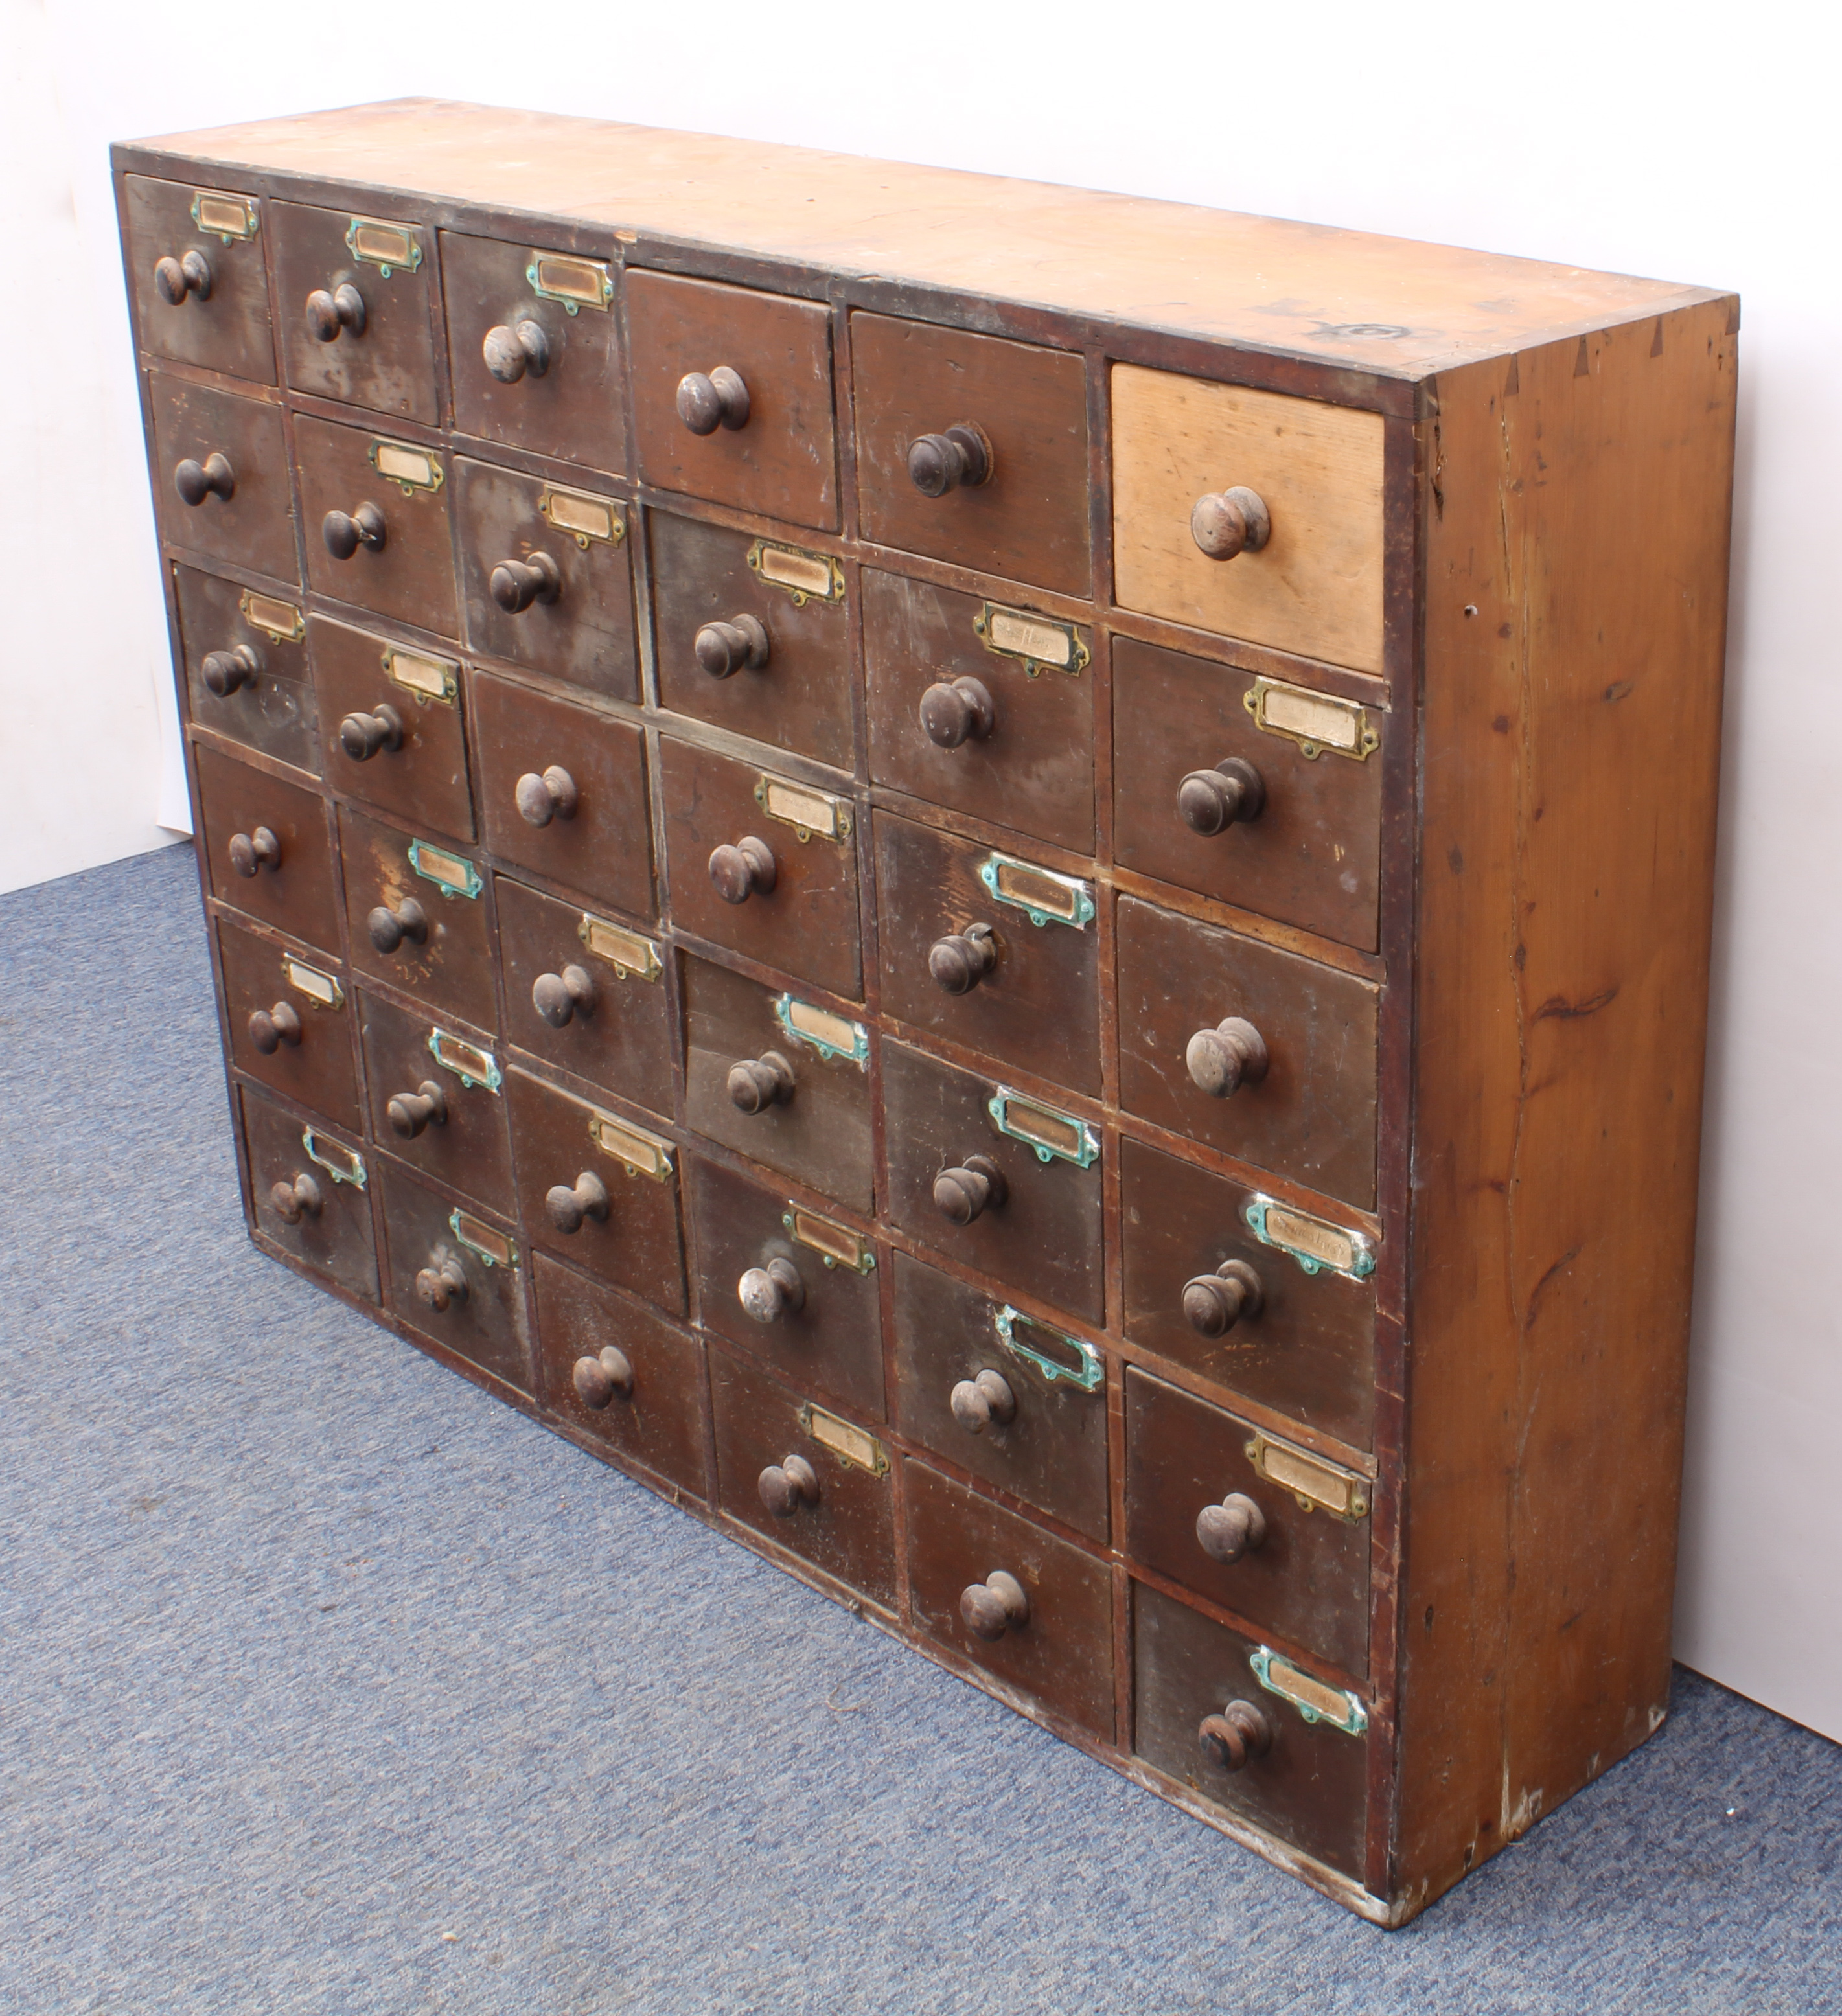 An early 20th century pine and beech wood 30-drawer pharmacy or shopkeeper's cabinet - the